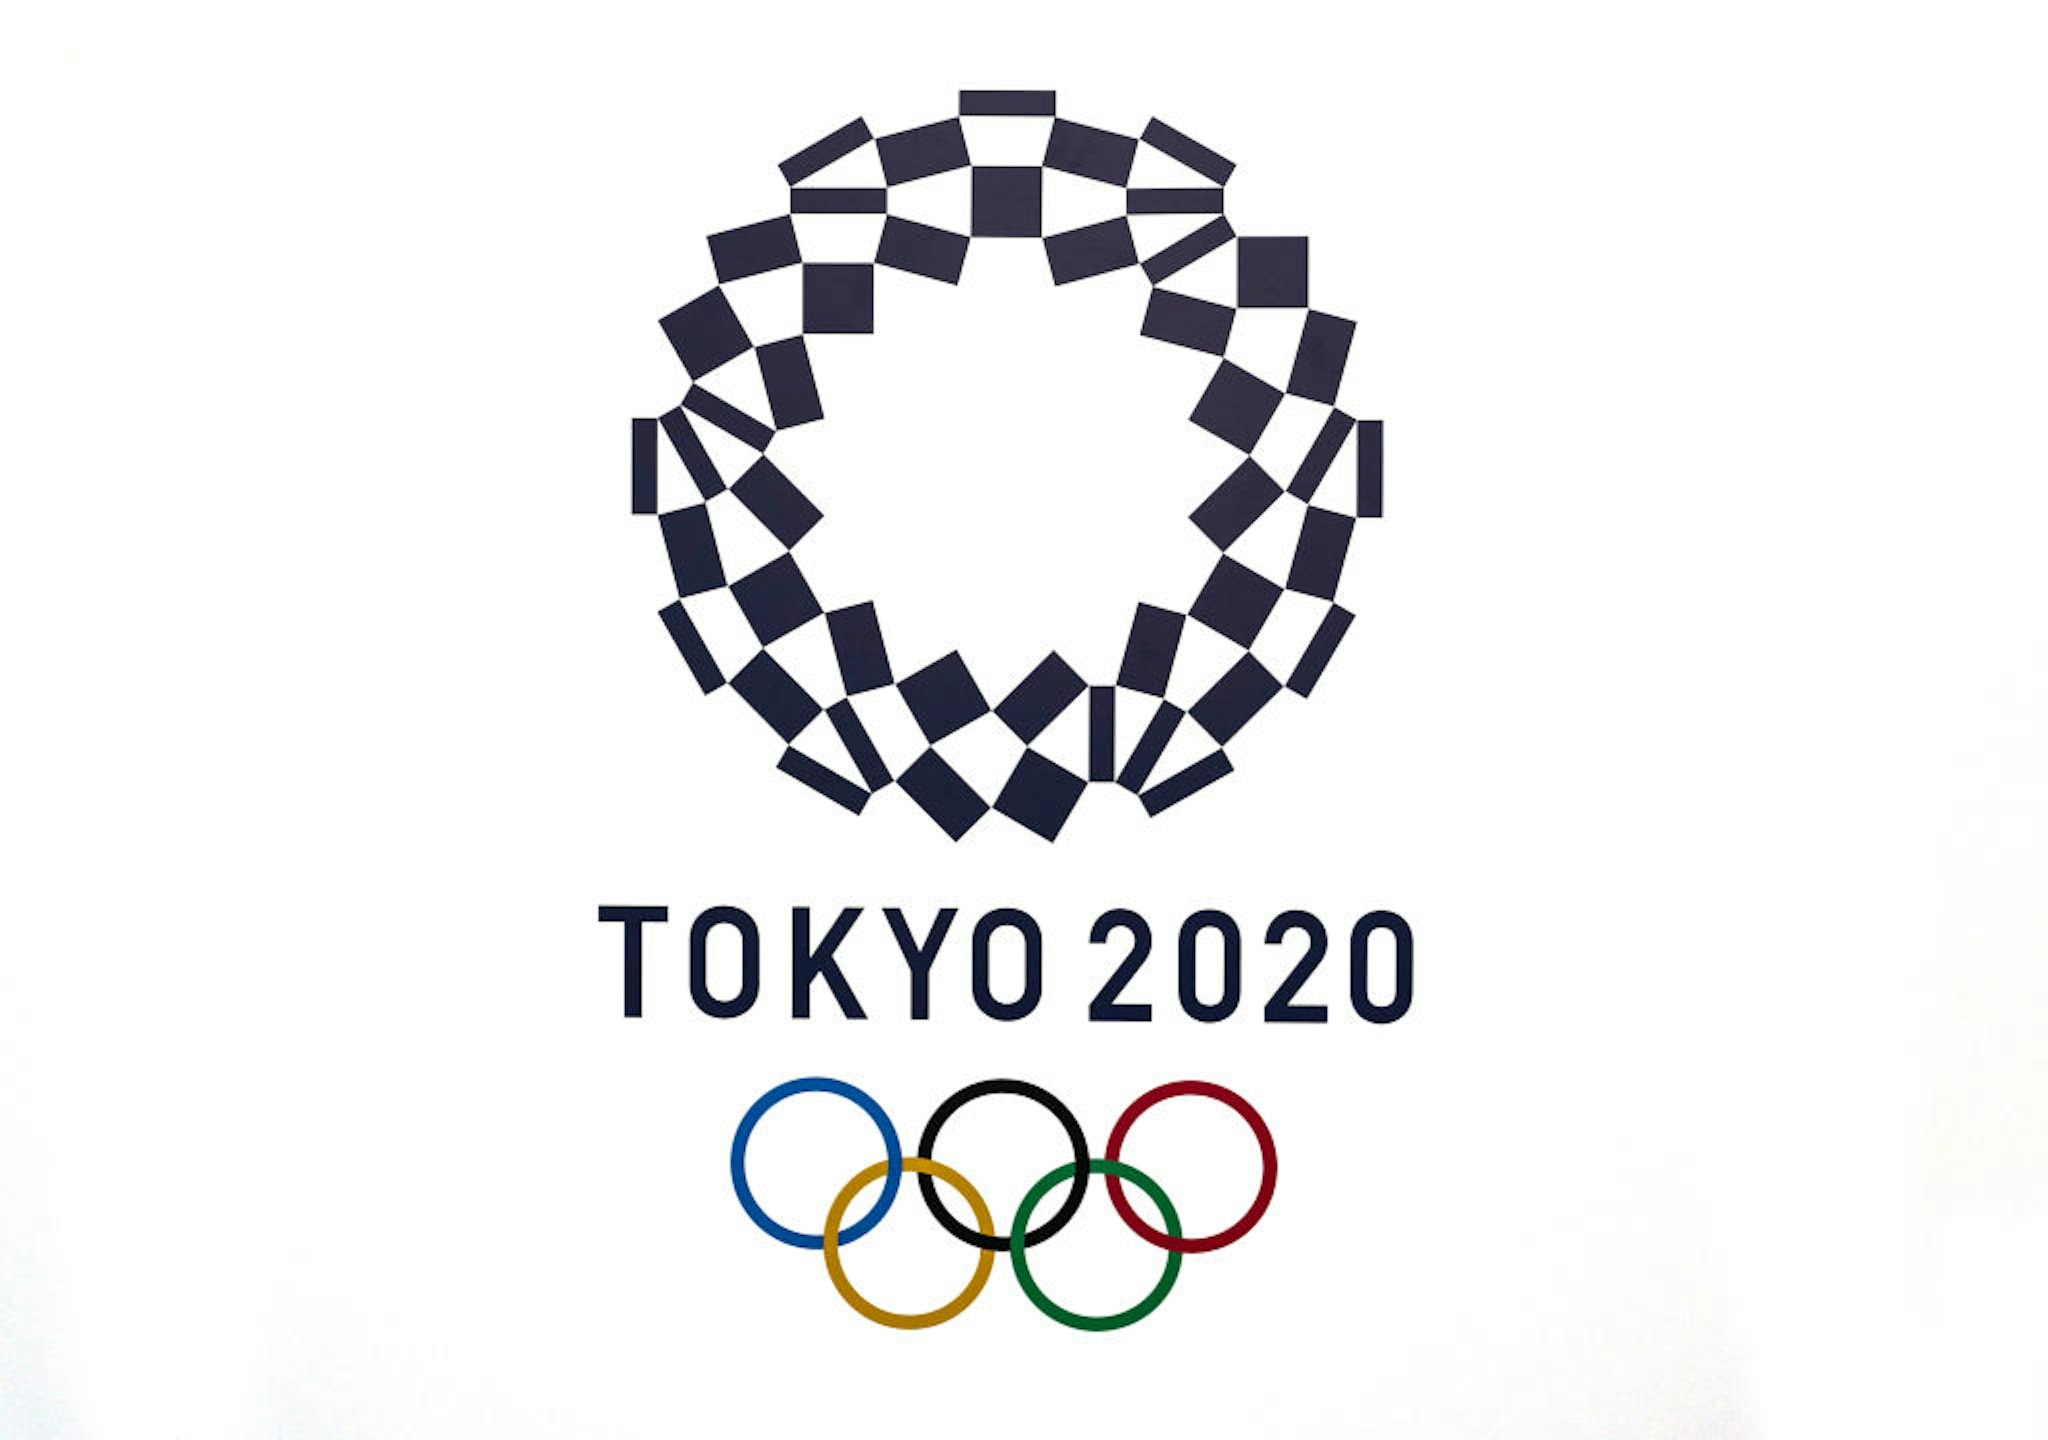 Tokyo 2020 logo during the Athletics kitting out session for the Tokyo Olympics 2020 at the Birmingham NEC, UK.